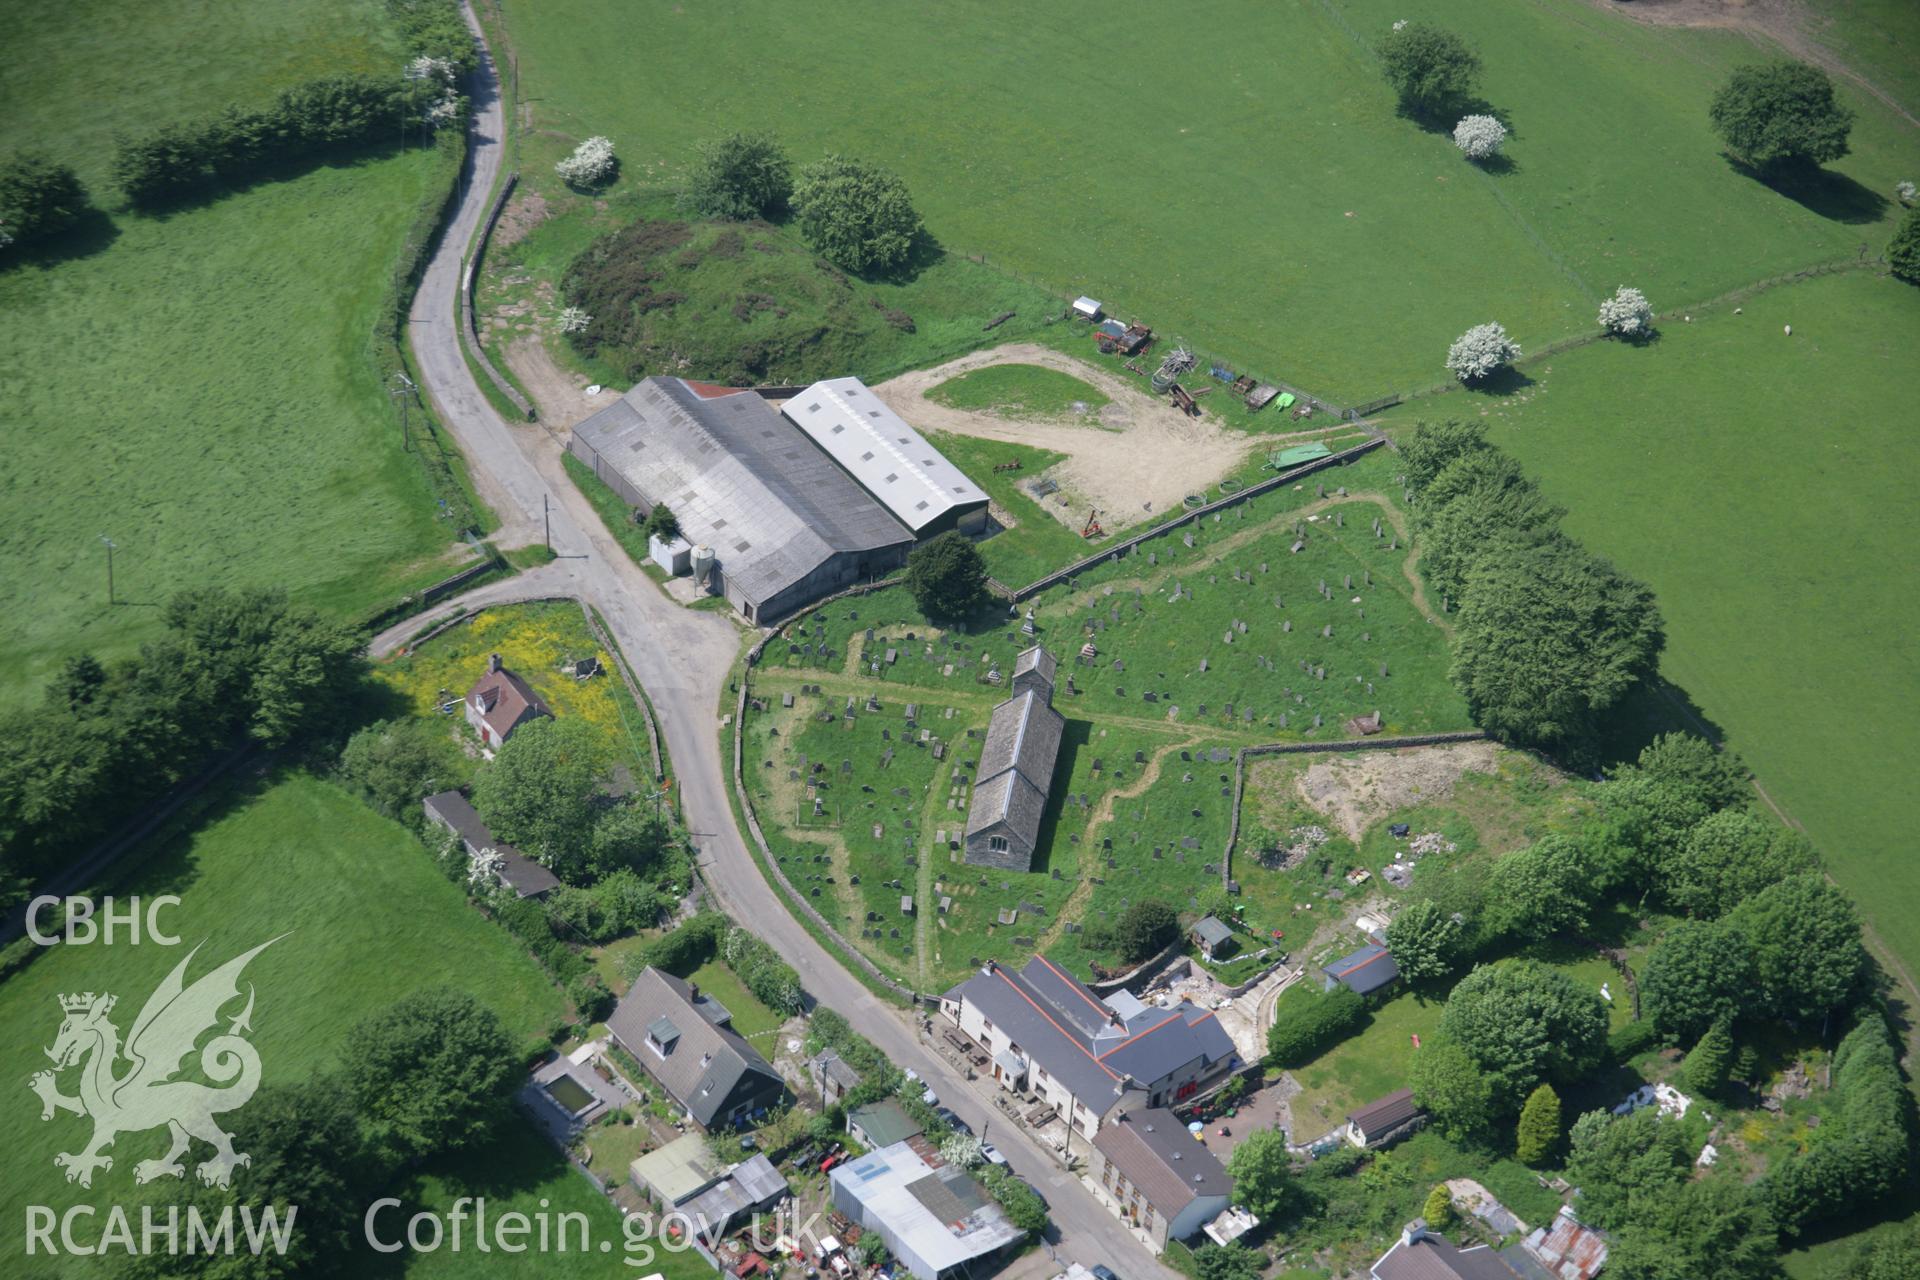 RCAHMW colour oblique aerial photograph of St Illtyd's Castle Mound from the east. Taken on 09 June 2006 by Toby Driver.